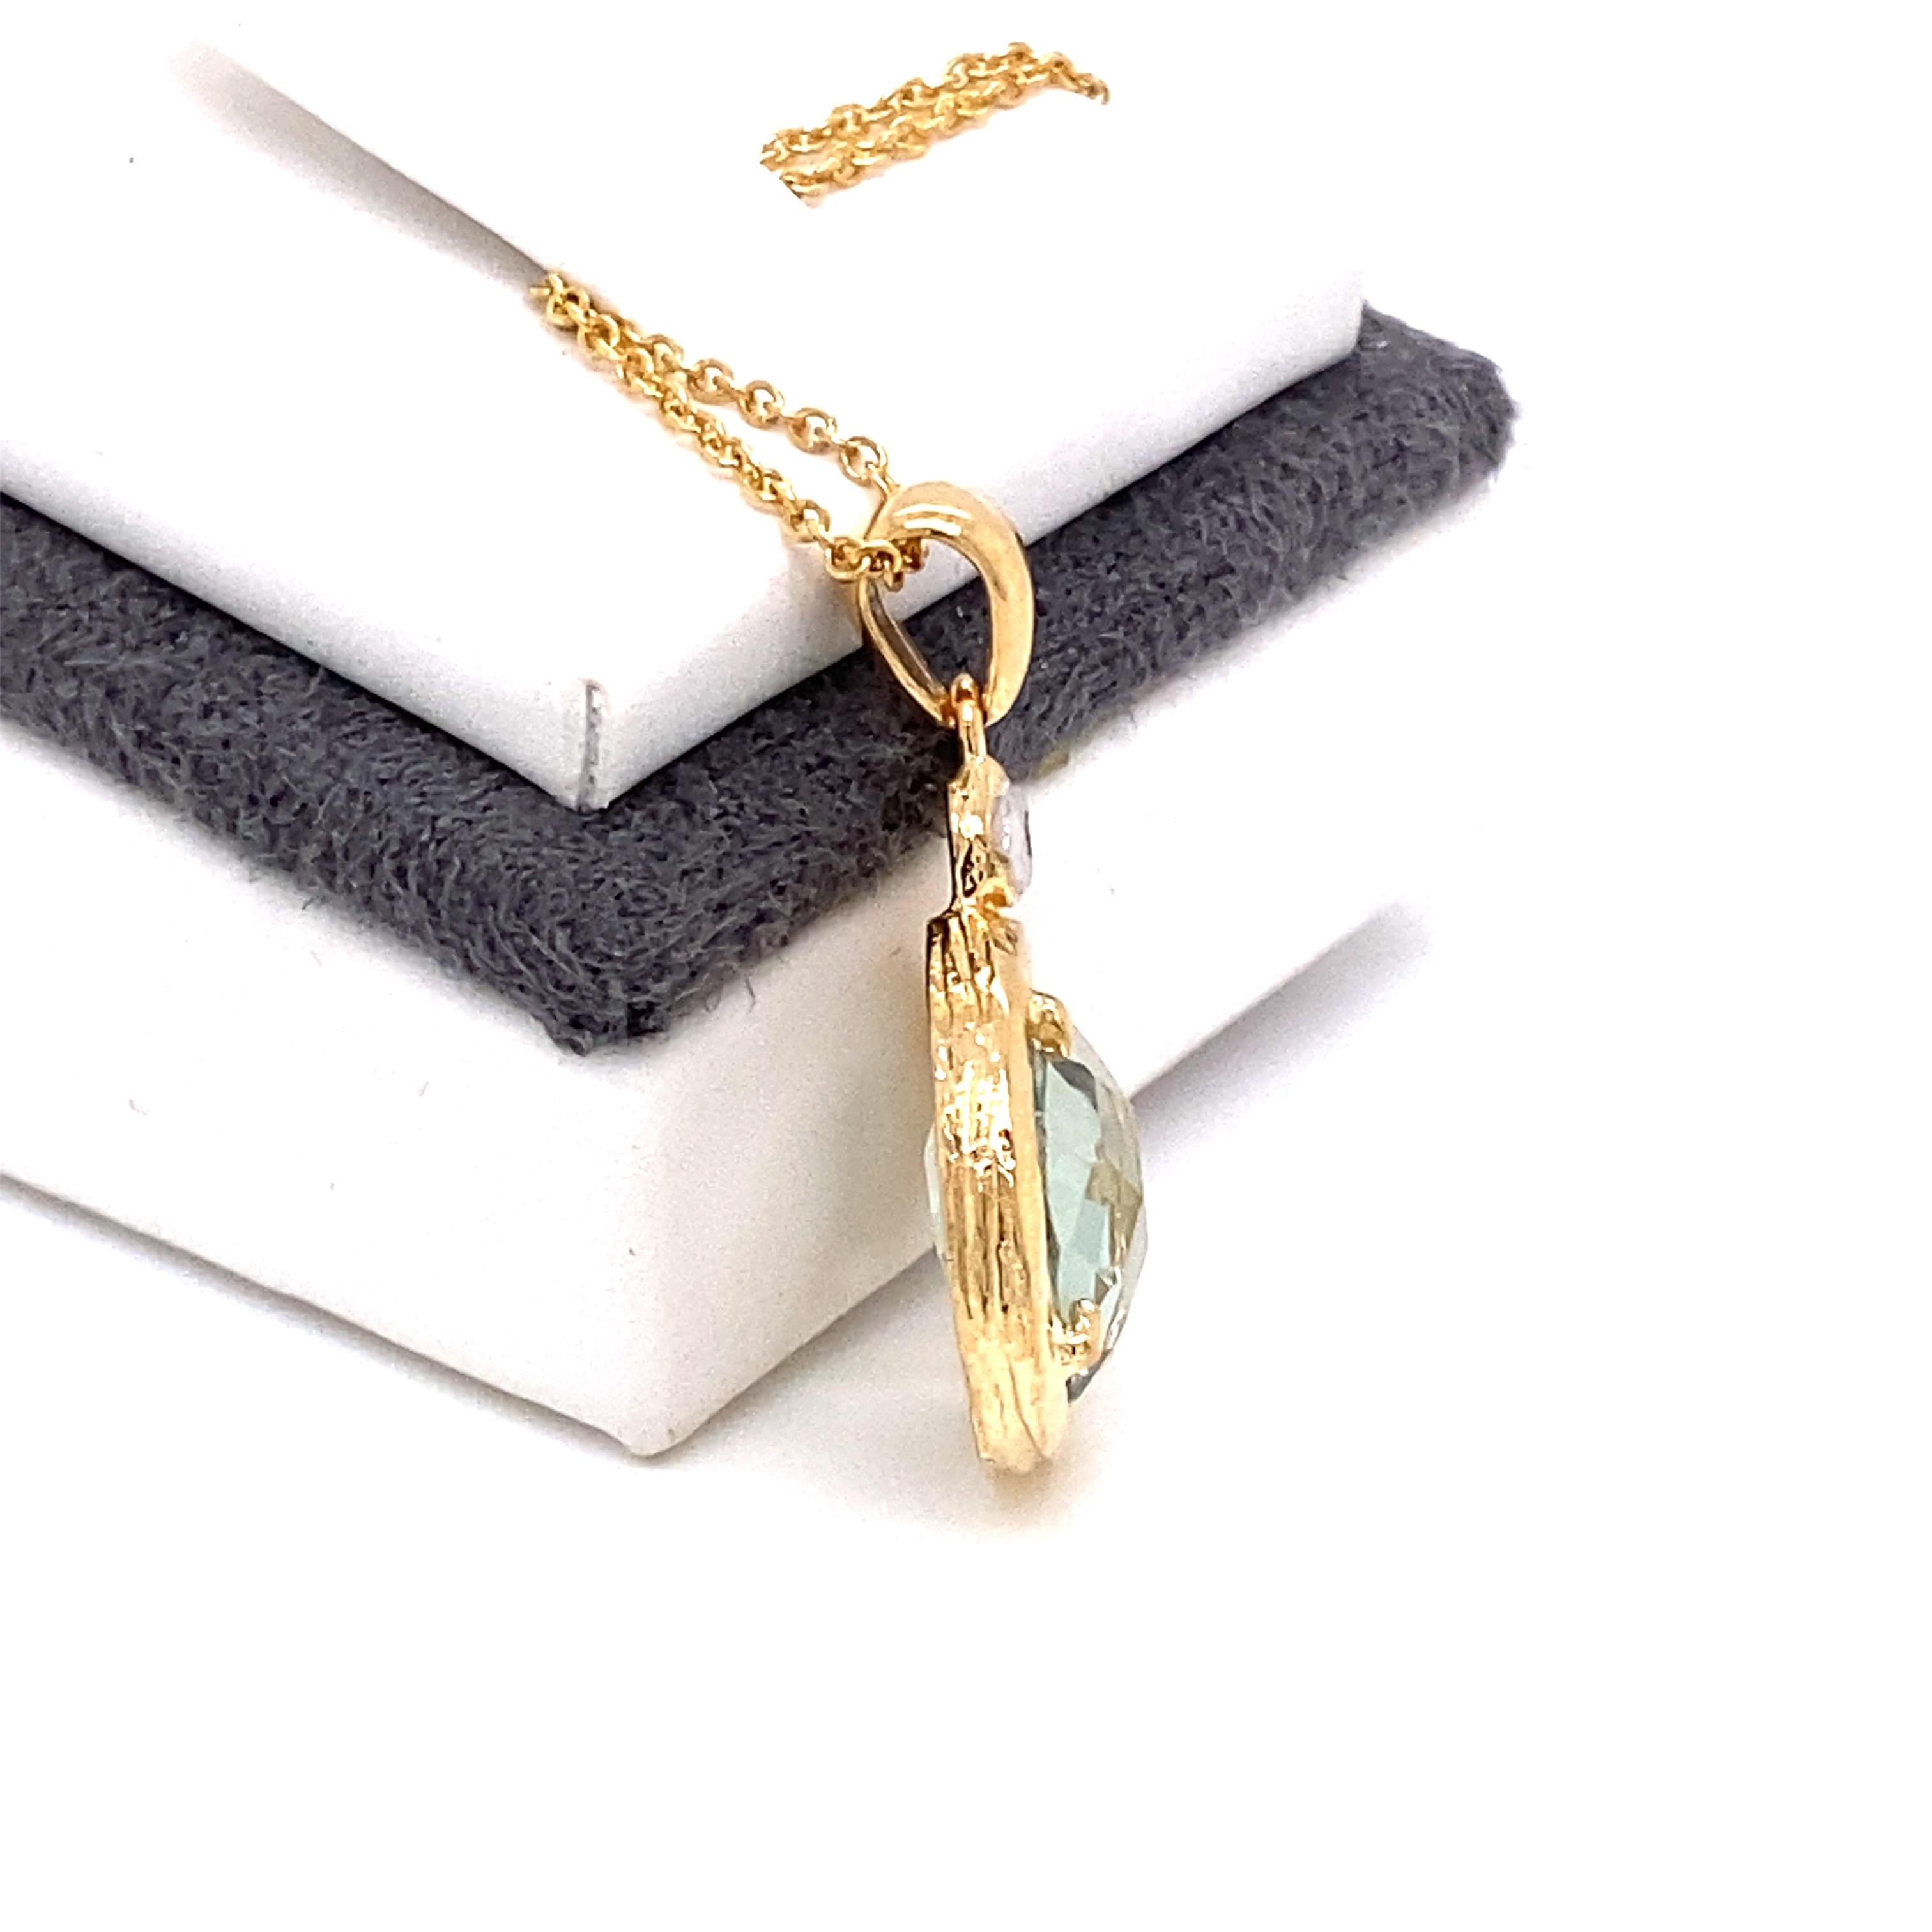 14 Karat Yellow Gold Hand-Crafted High-Polish and Texture-Finished 10mm Round Checkerboard Green Amethyst Semi-Precious Color Stone Pendant, Accented with 0.015 Carat of a Bezel Set Diamond, and Sliding on a 16